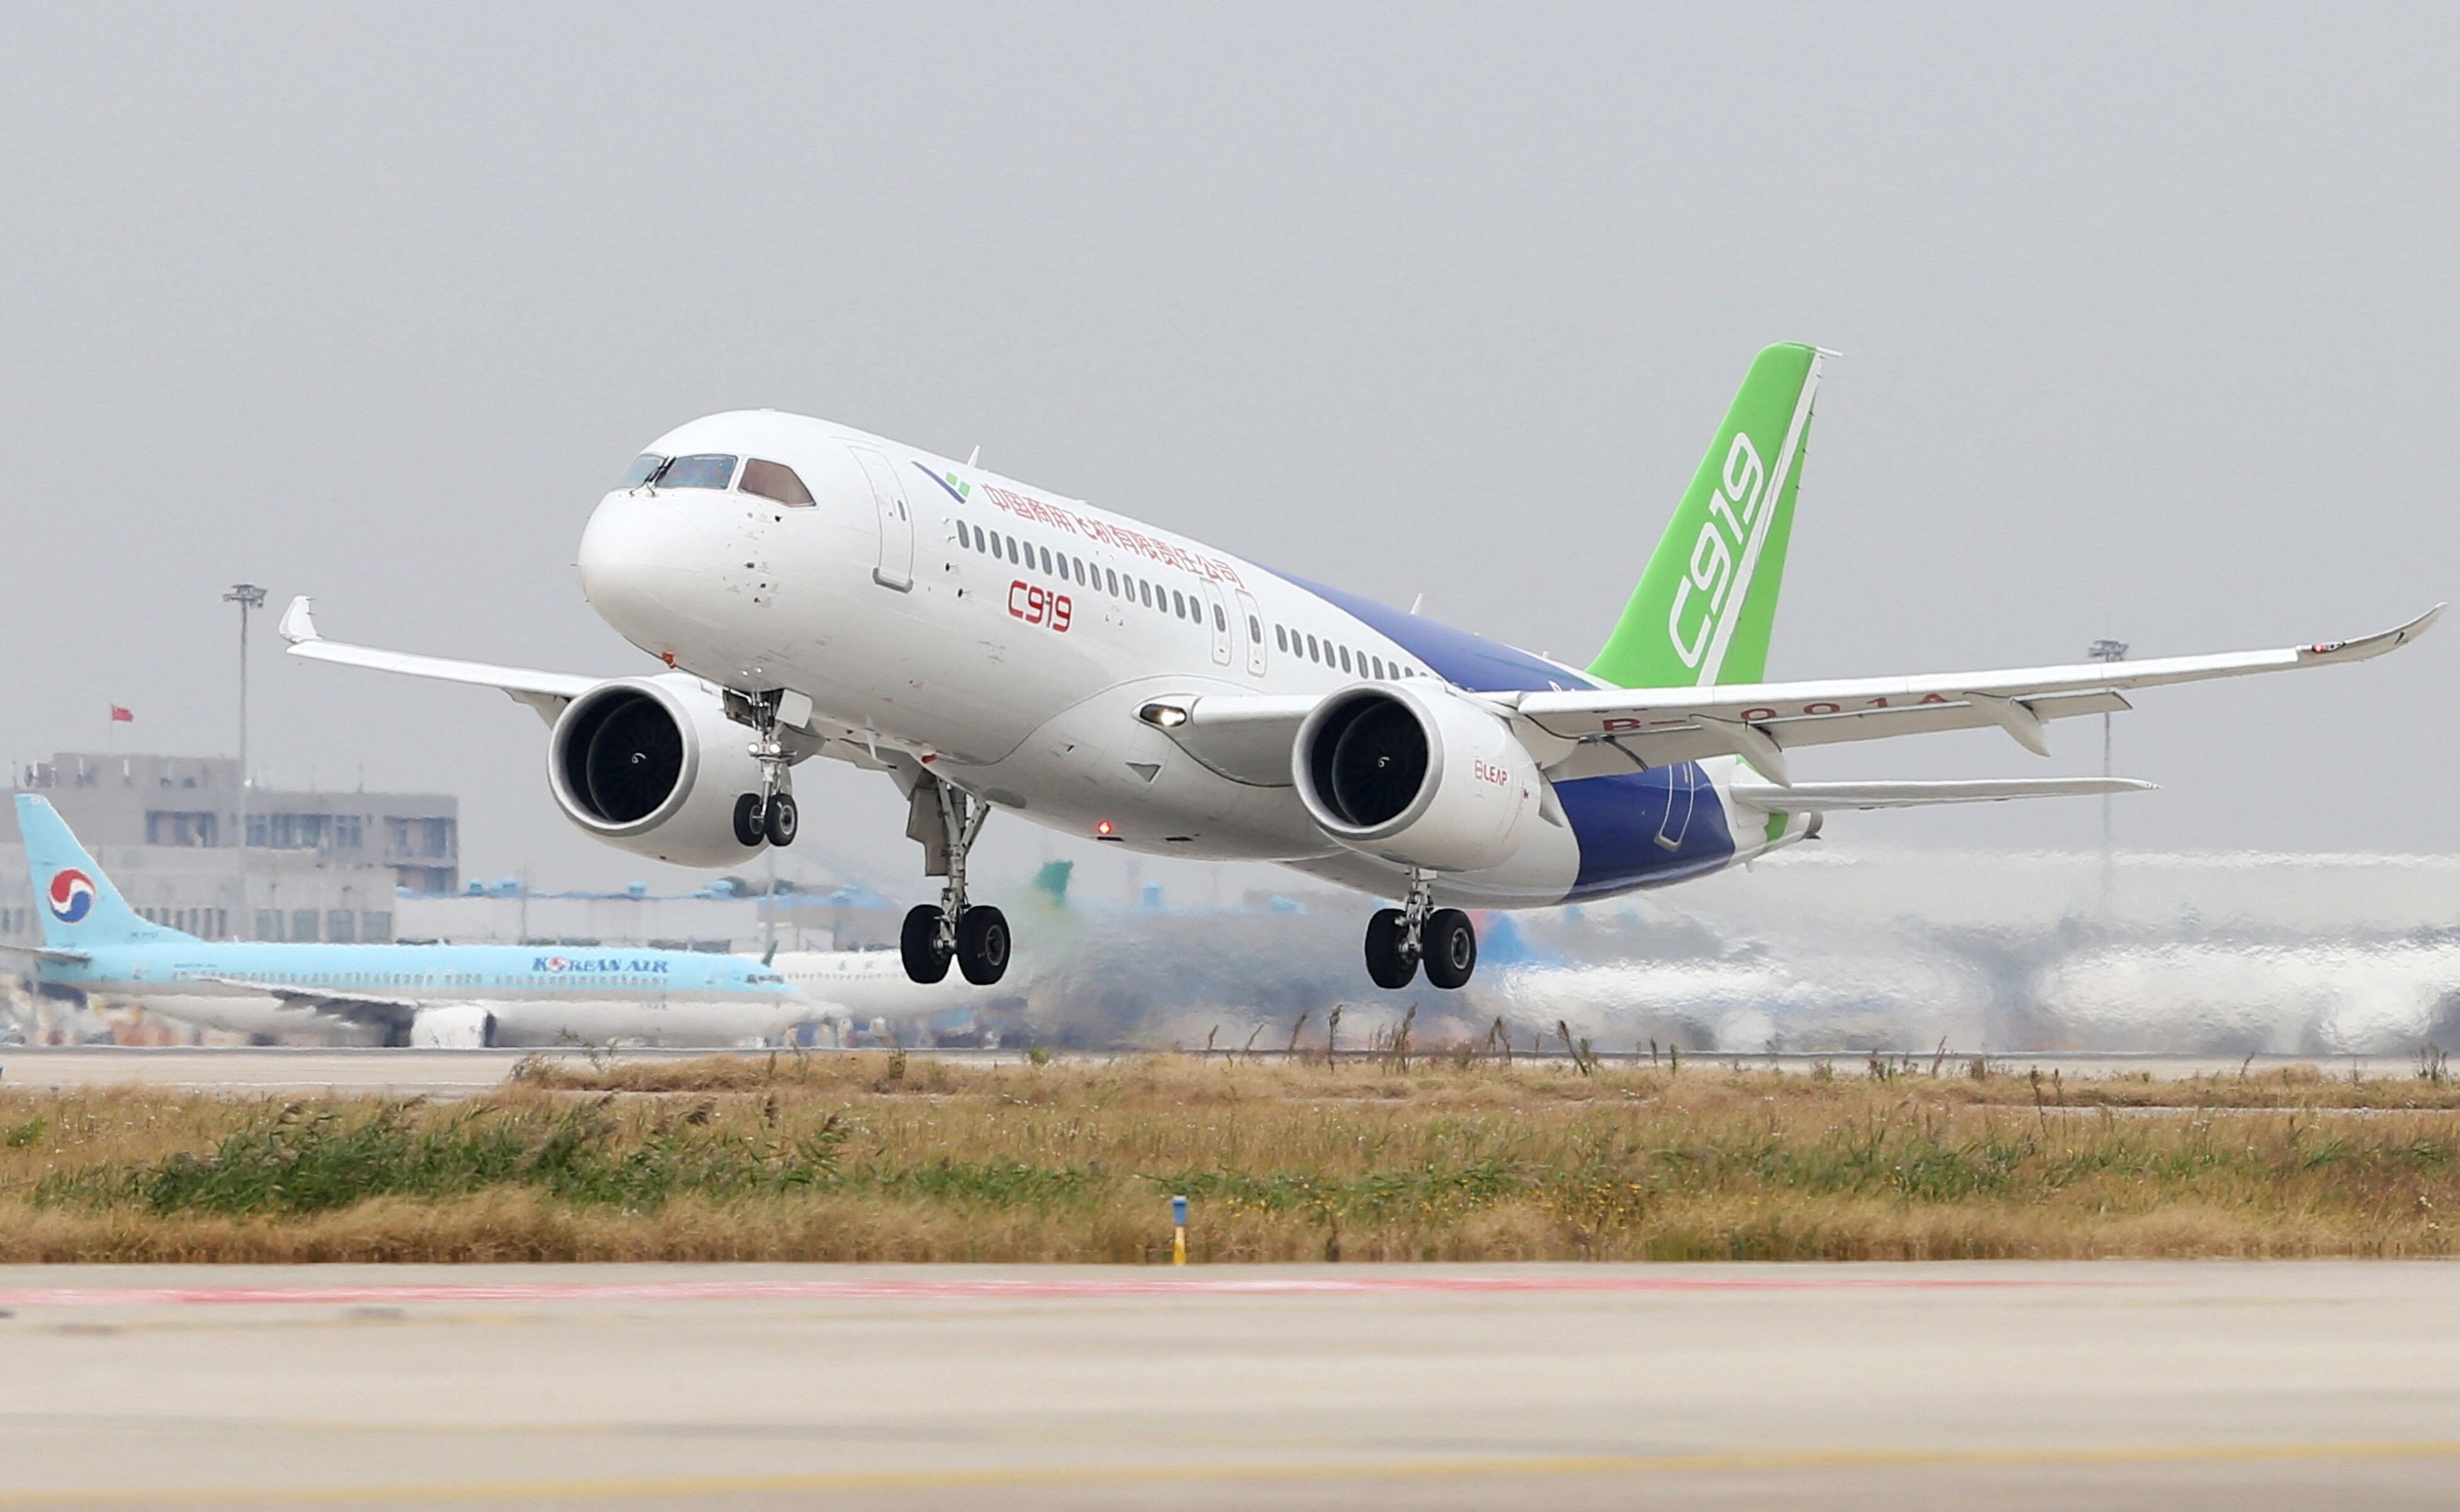 Comac’s C919, China's first commercial passenger jet, takes off from Pudong International Airport in Shanghai. Photo: AFP